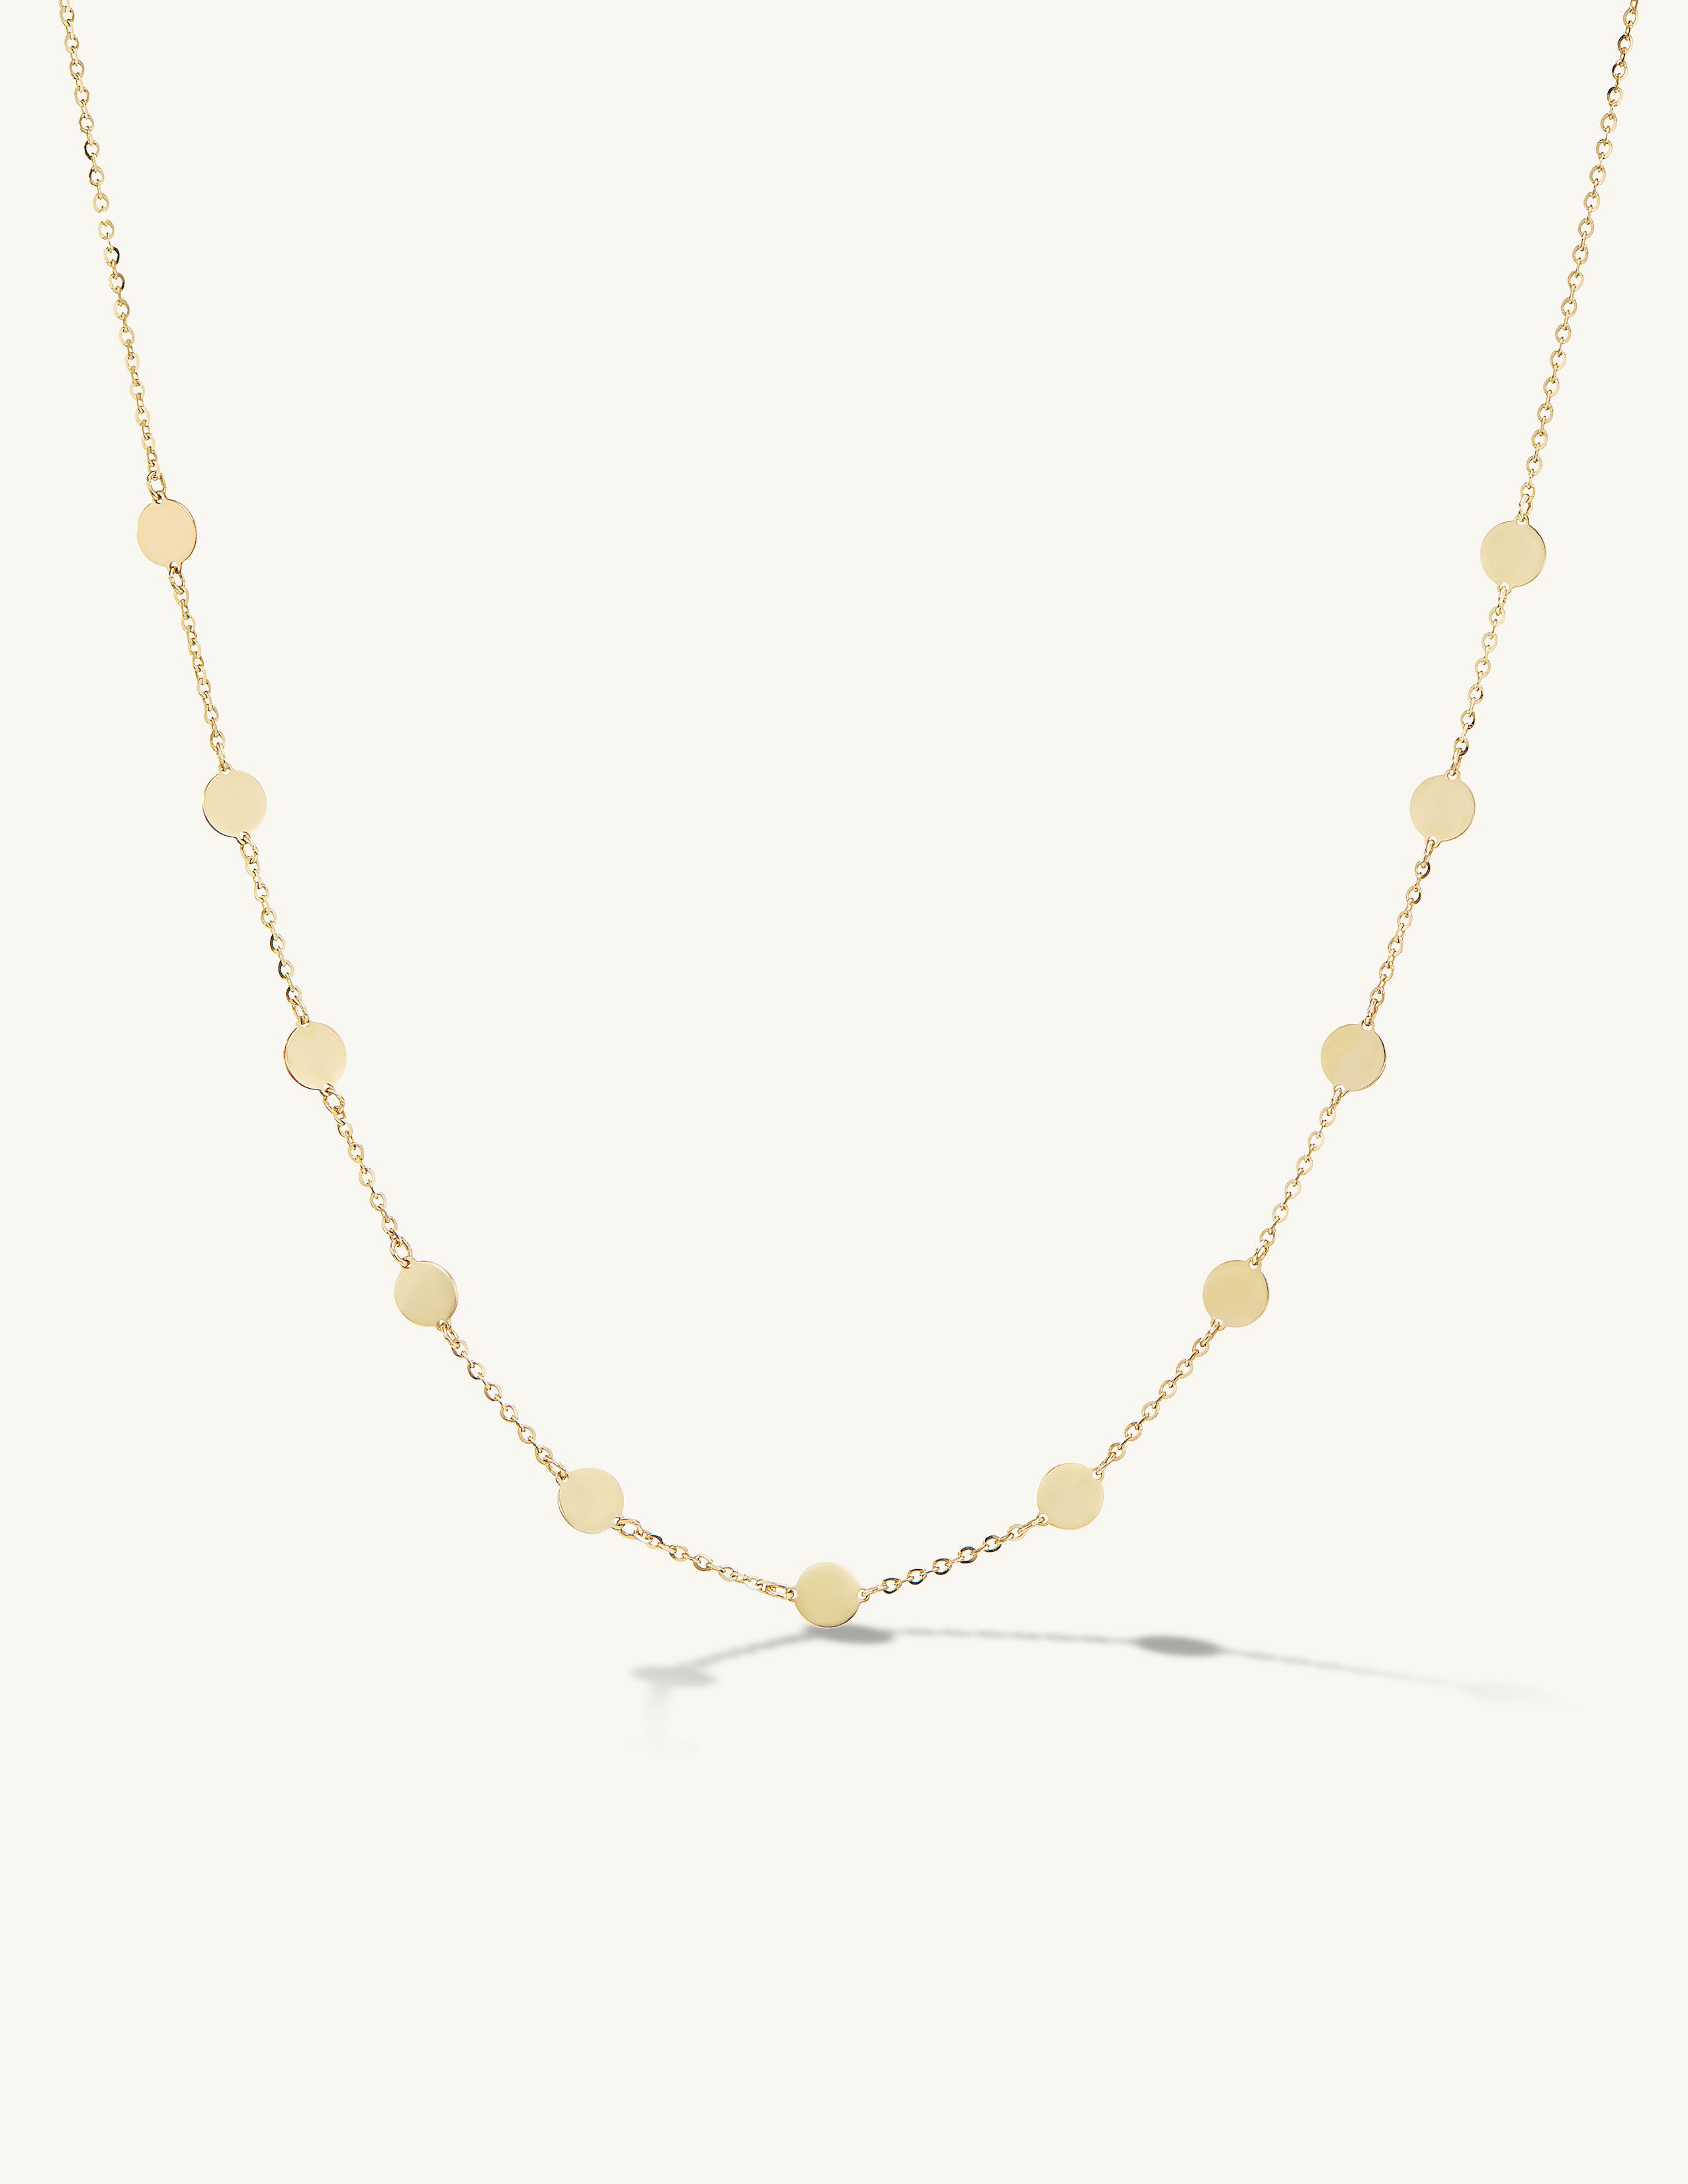 Golden Disc Chain Necklace